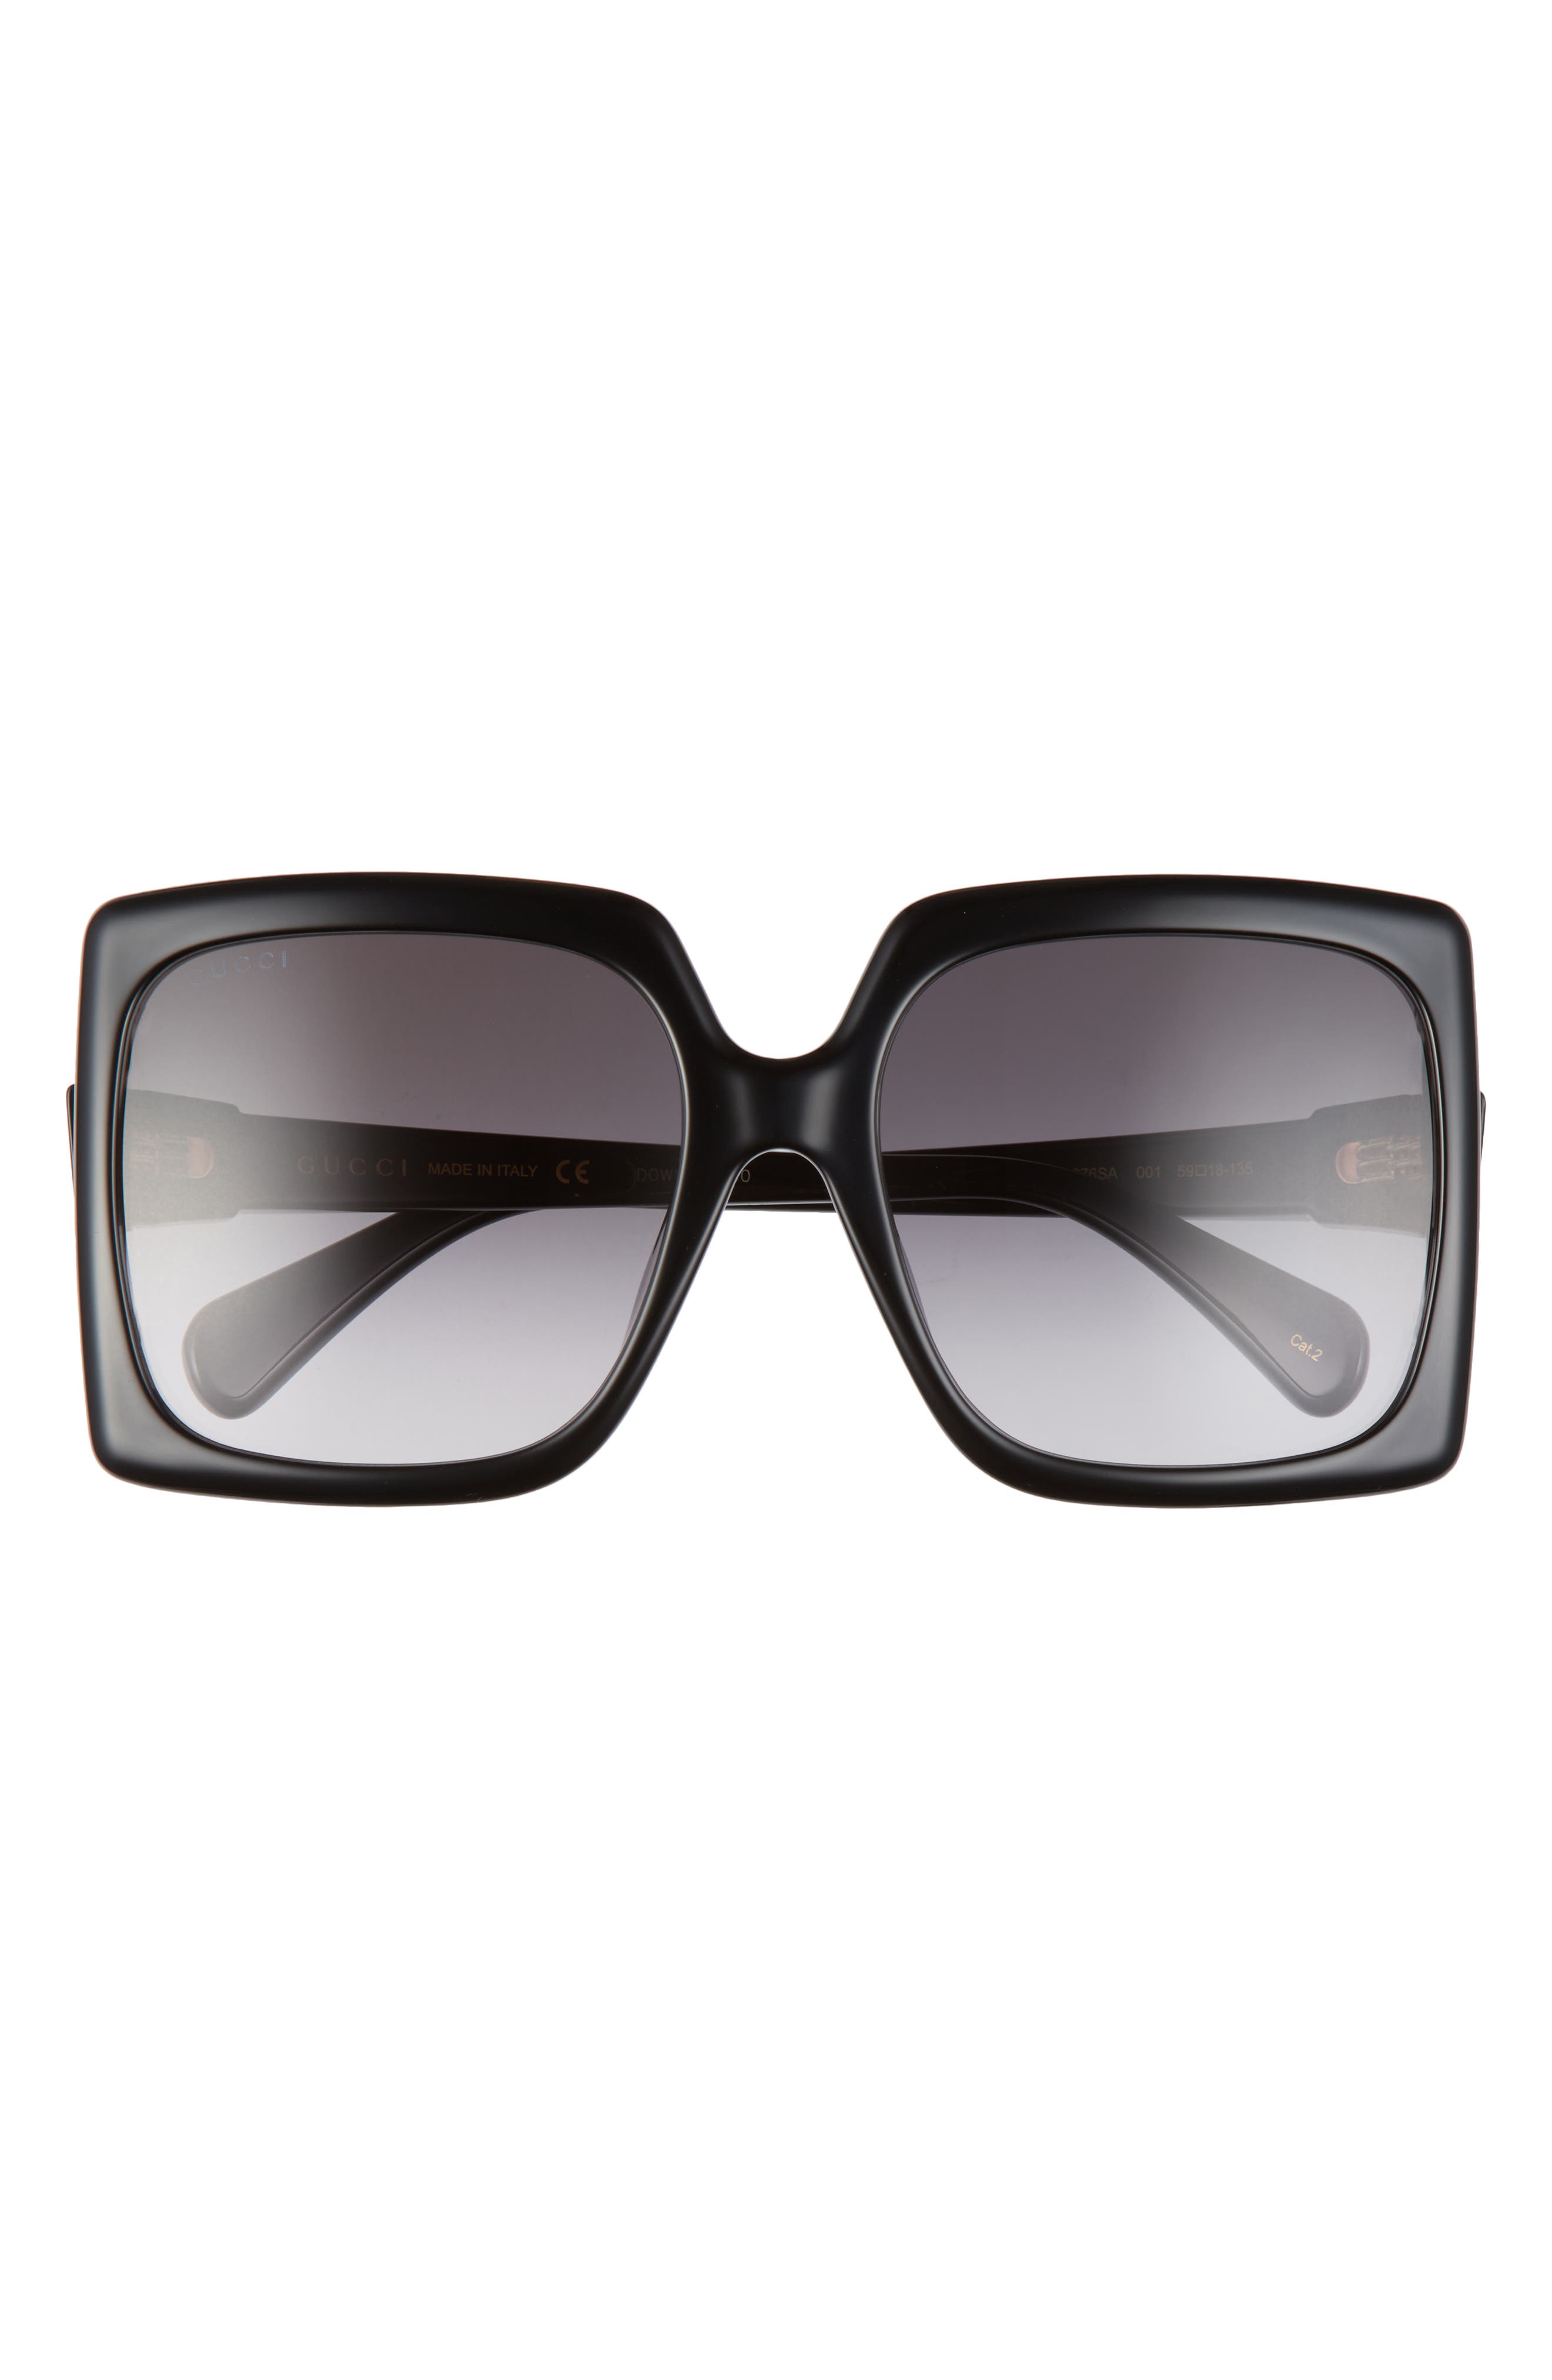 gucci sunglasses house of fraser